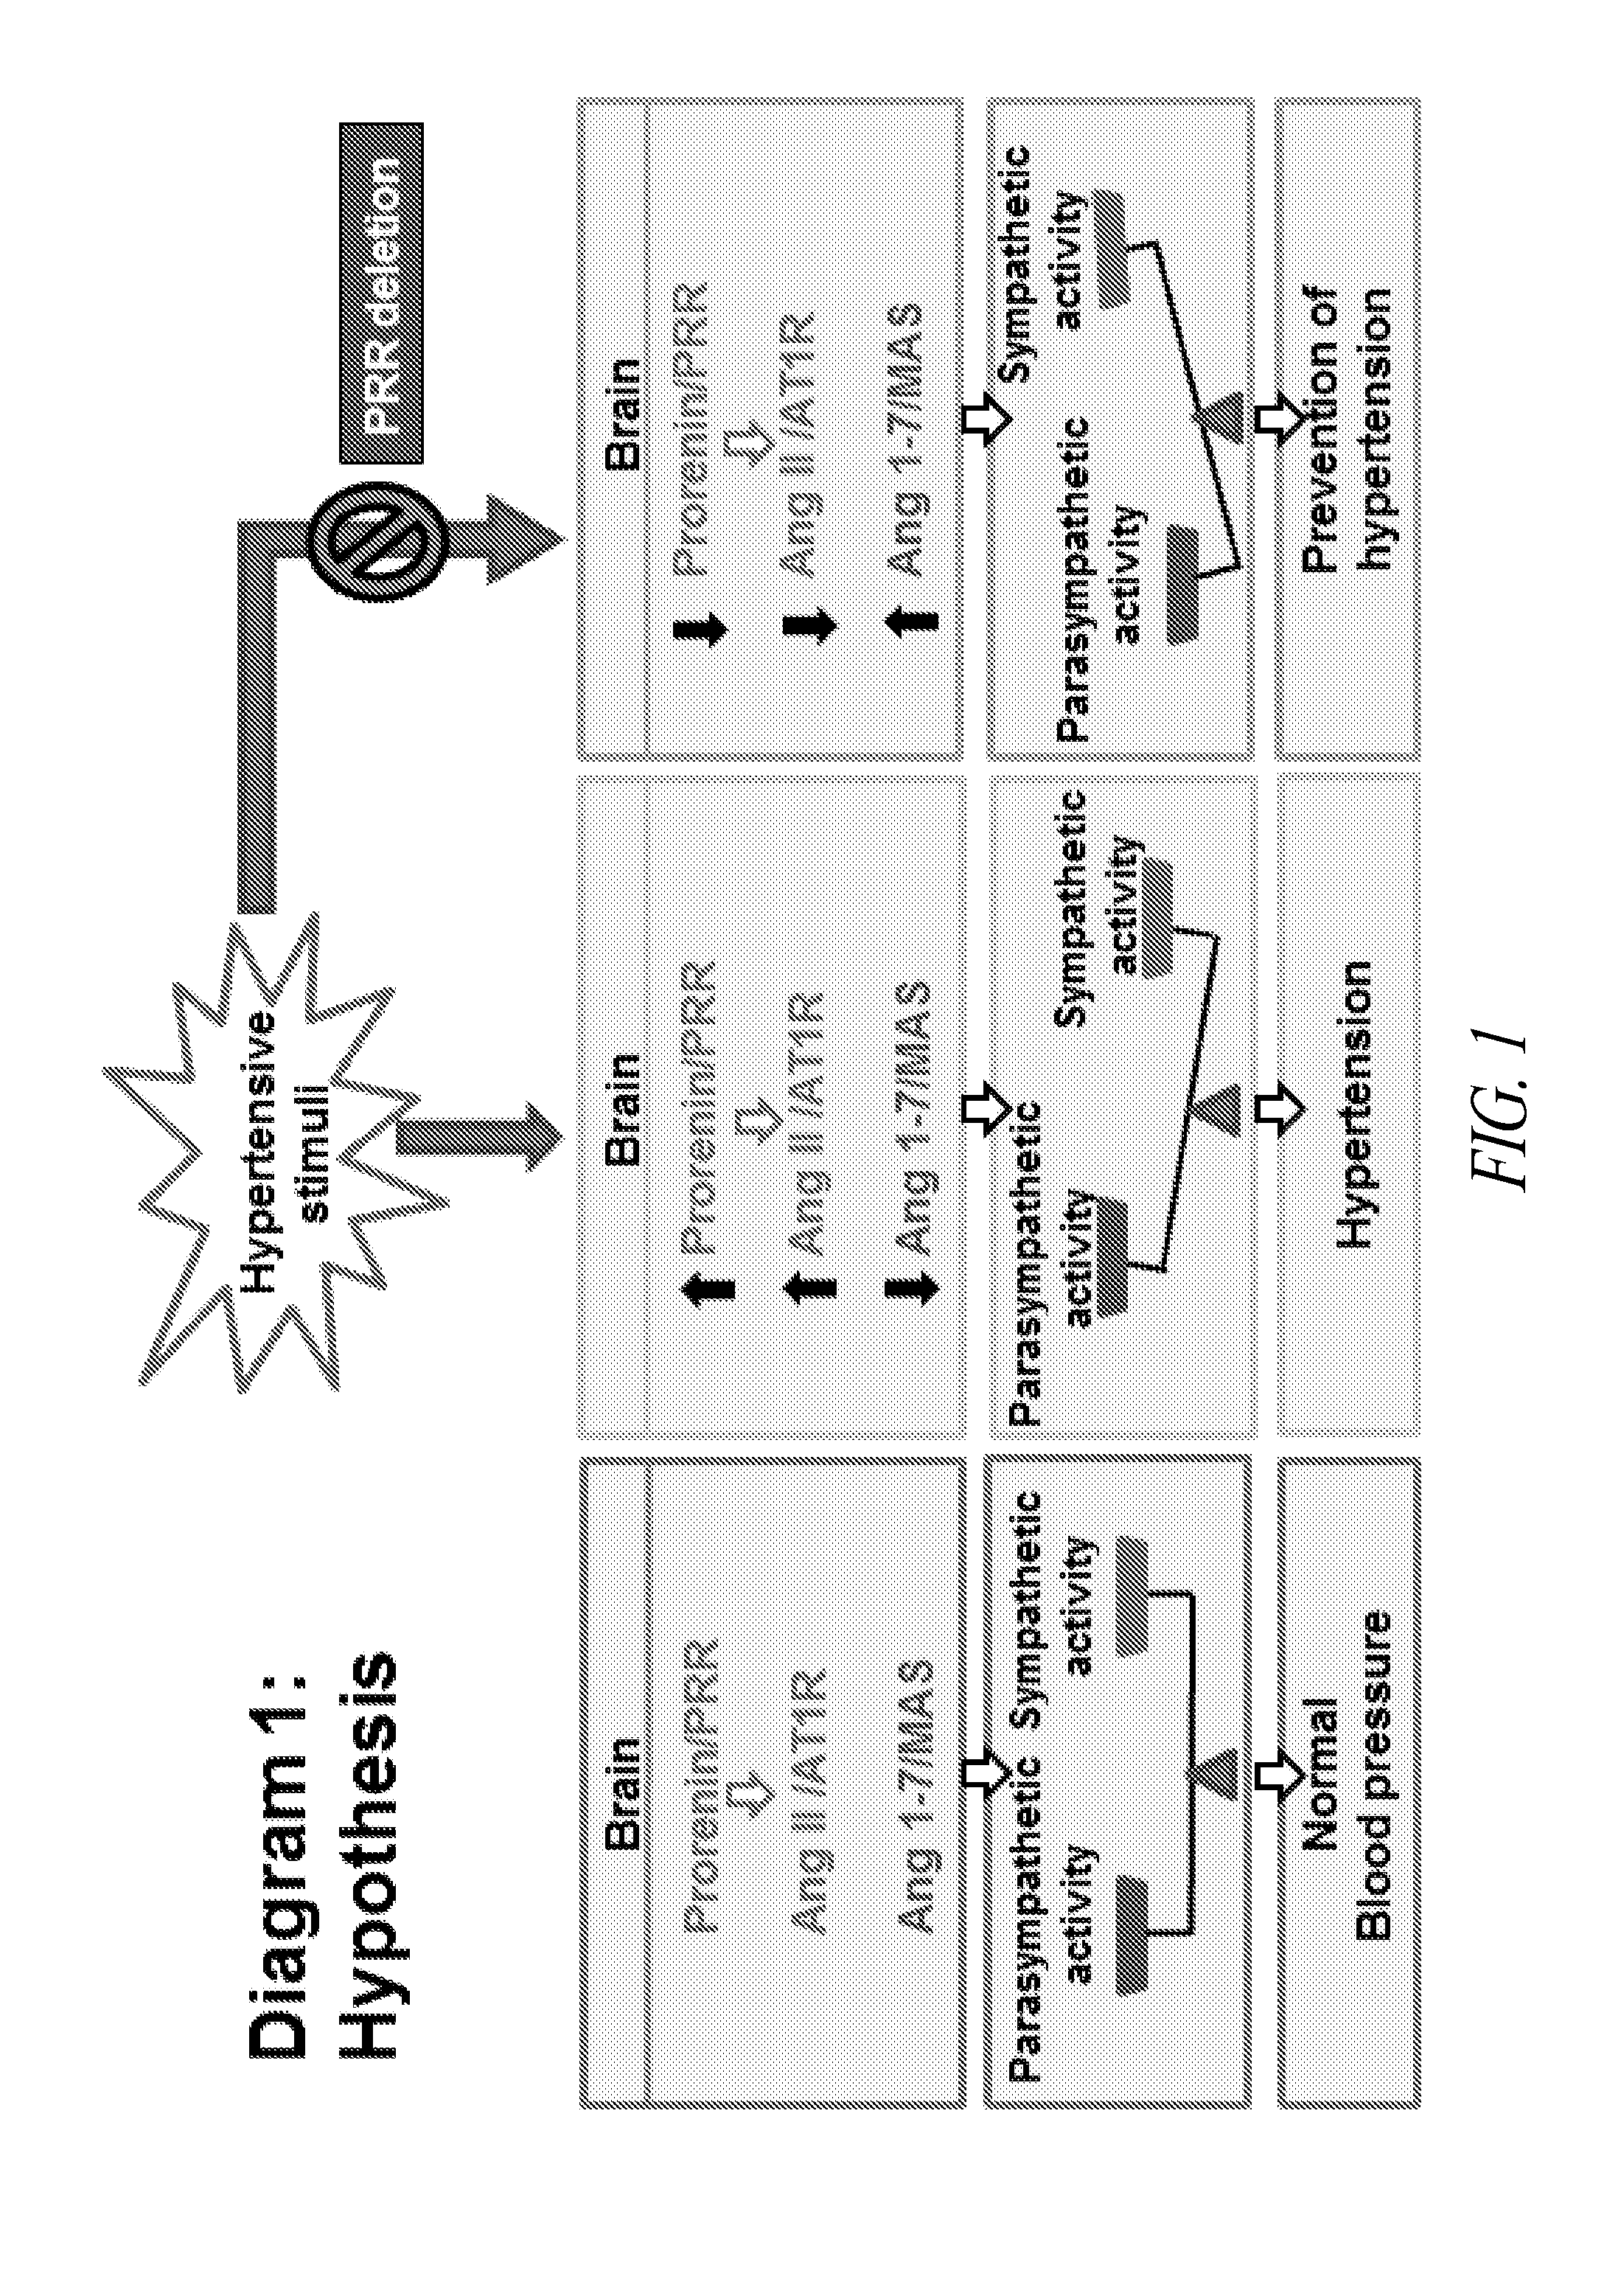 Antagonist for (PRO)renin receptor for the treatment of hypertension and diabetes